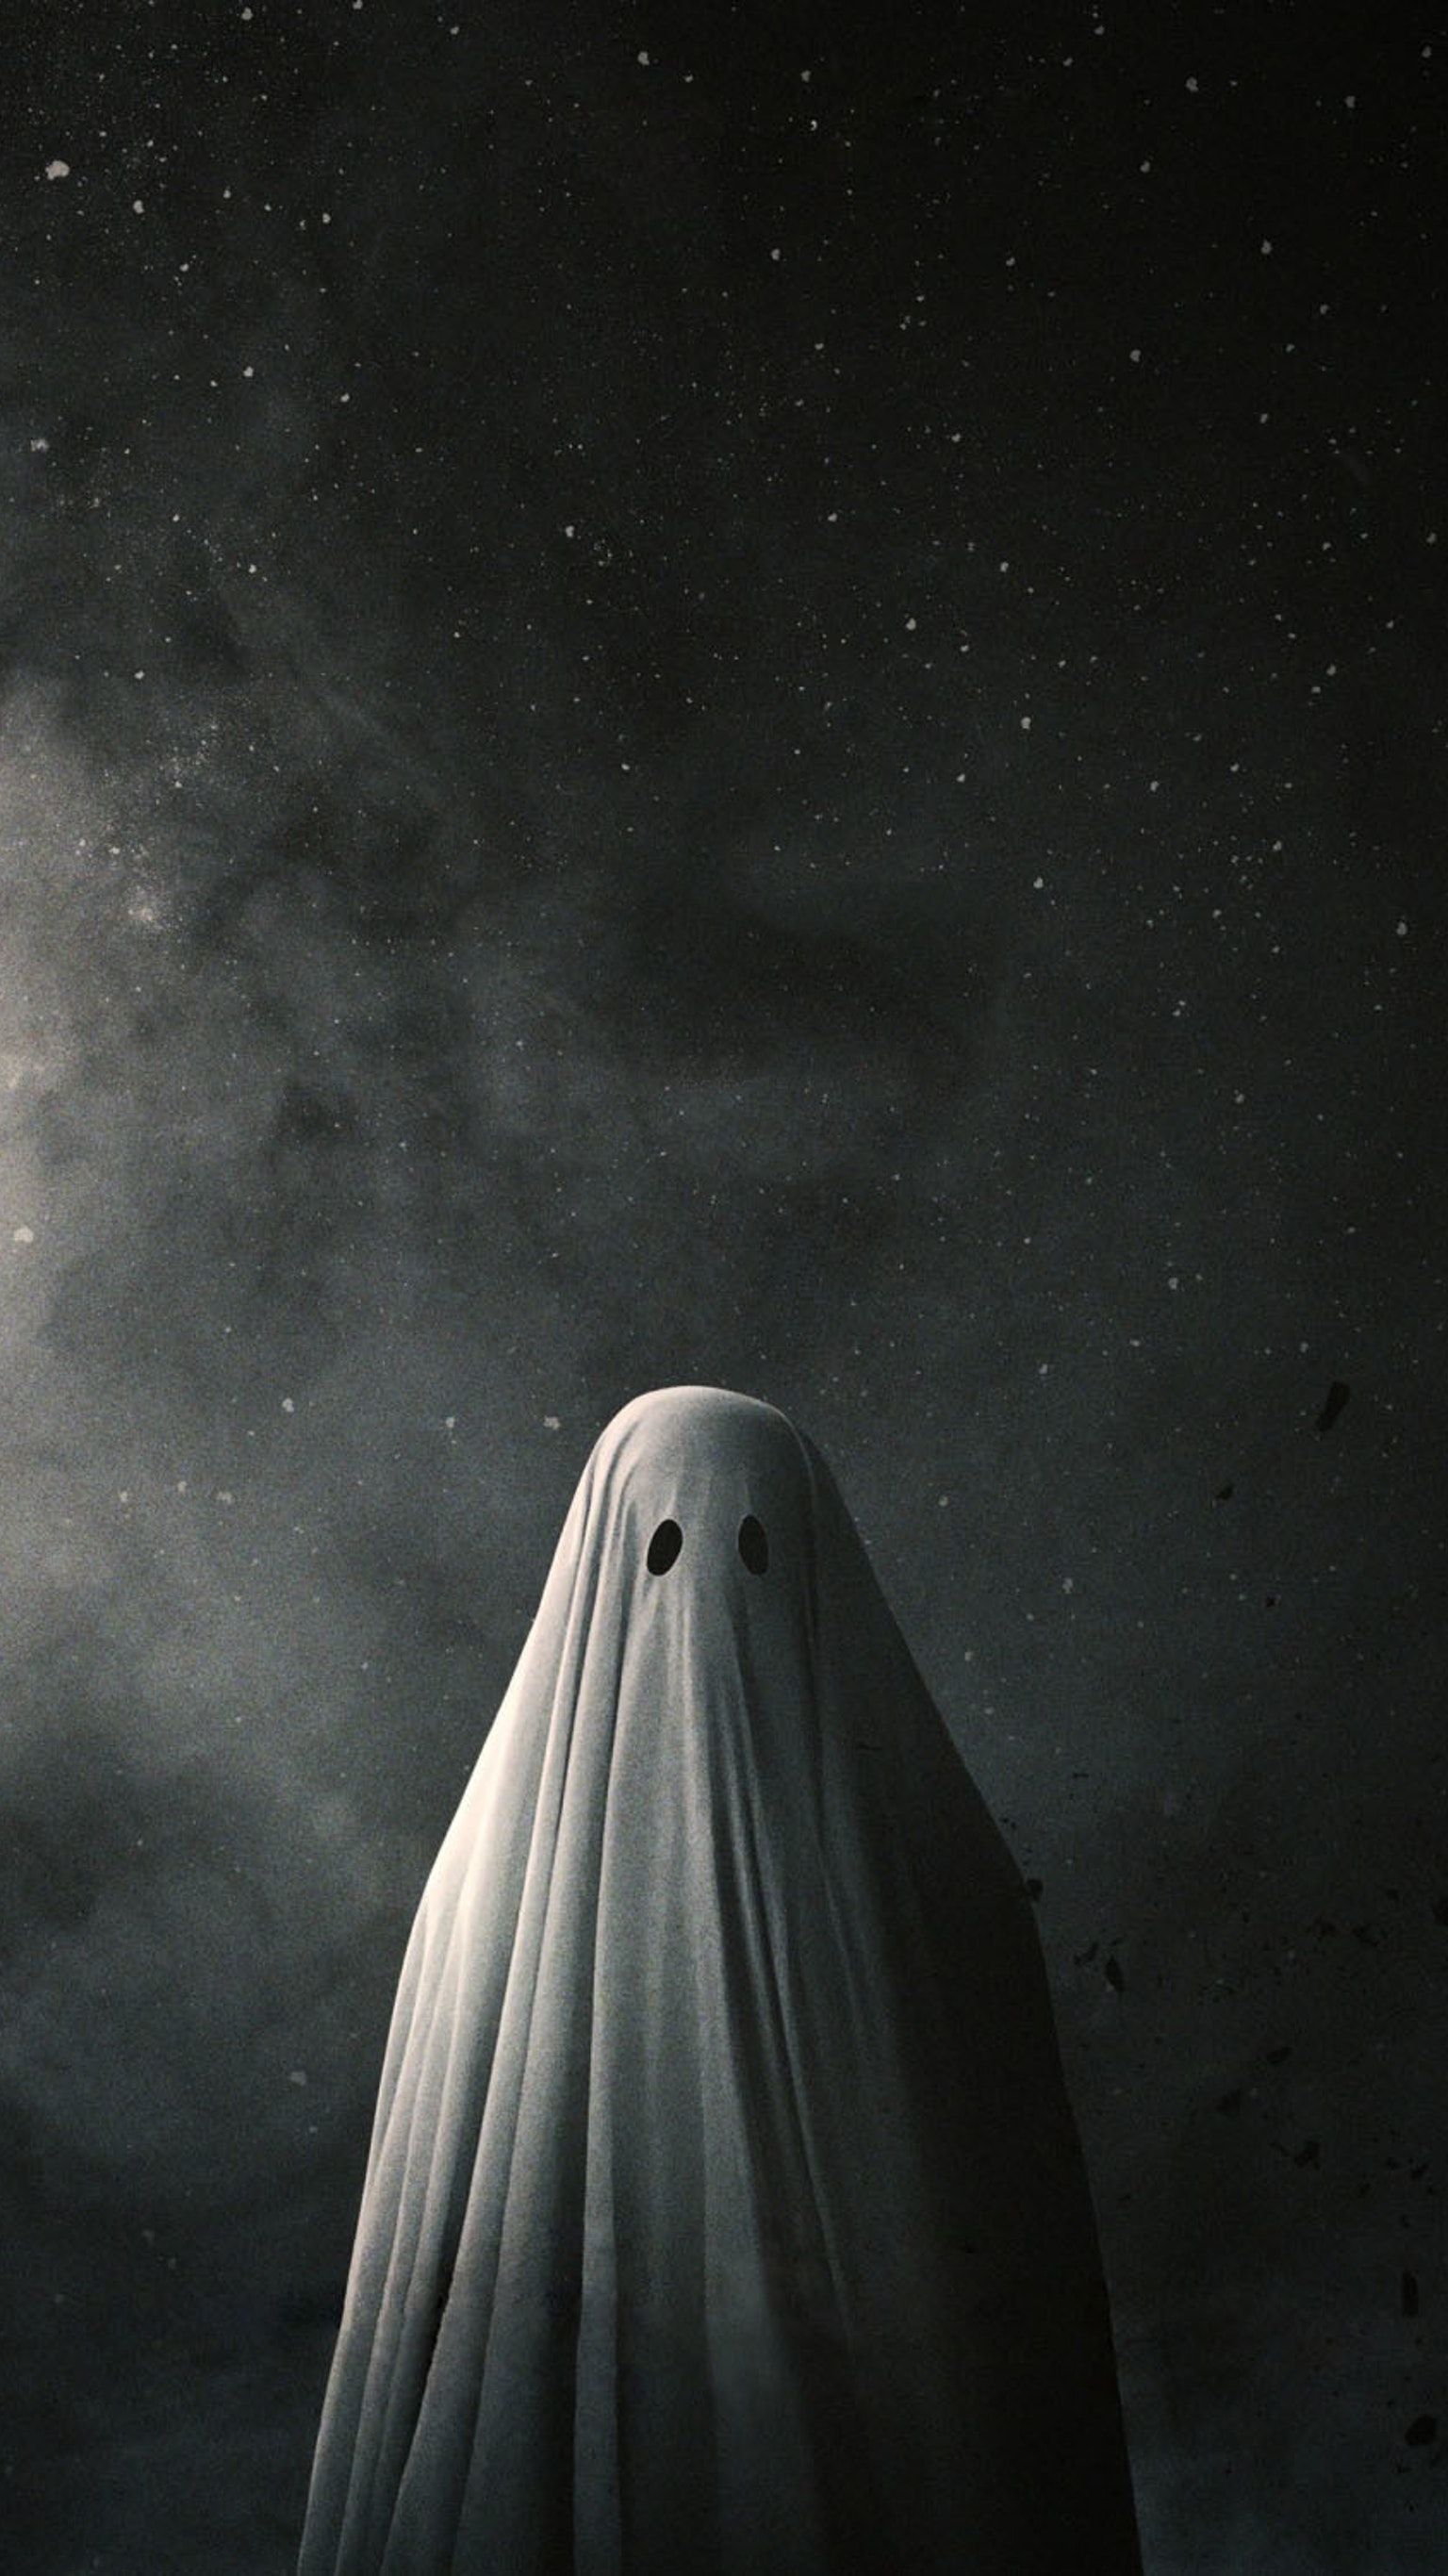 A Ghost Story Wallpaper Free A .wallpaperaccess.com